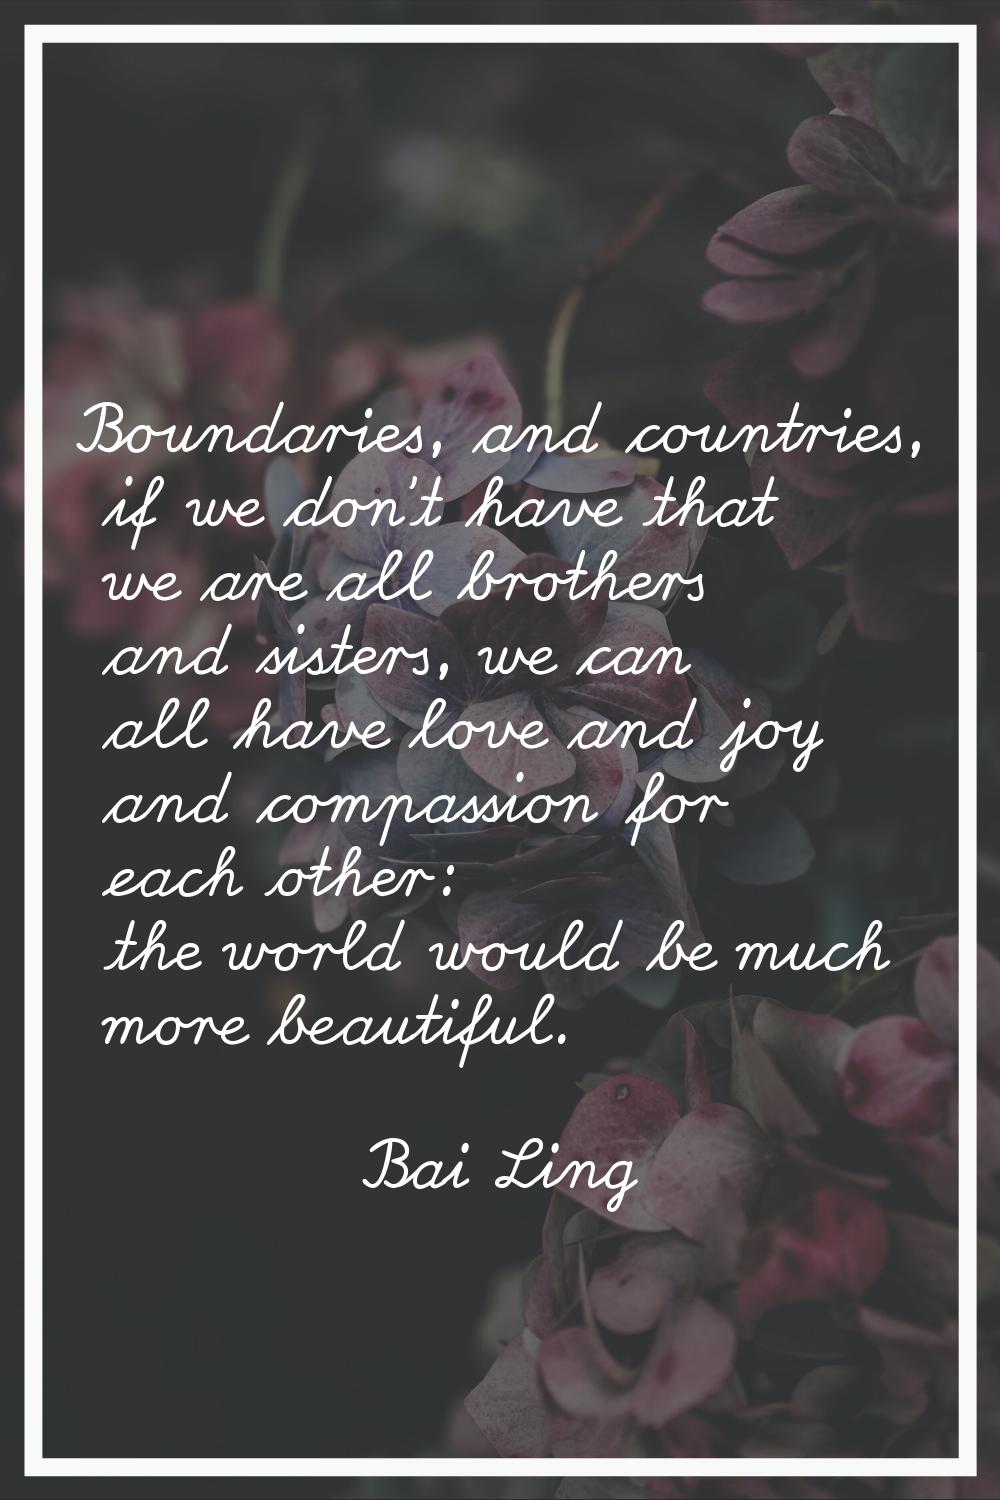 Boundaries, and countries, if we don't have that we are all brothers and sisters, we can all have l